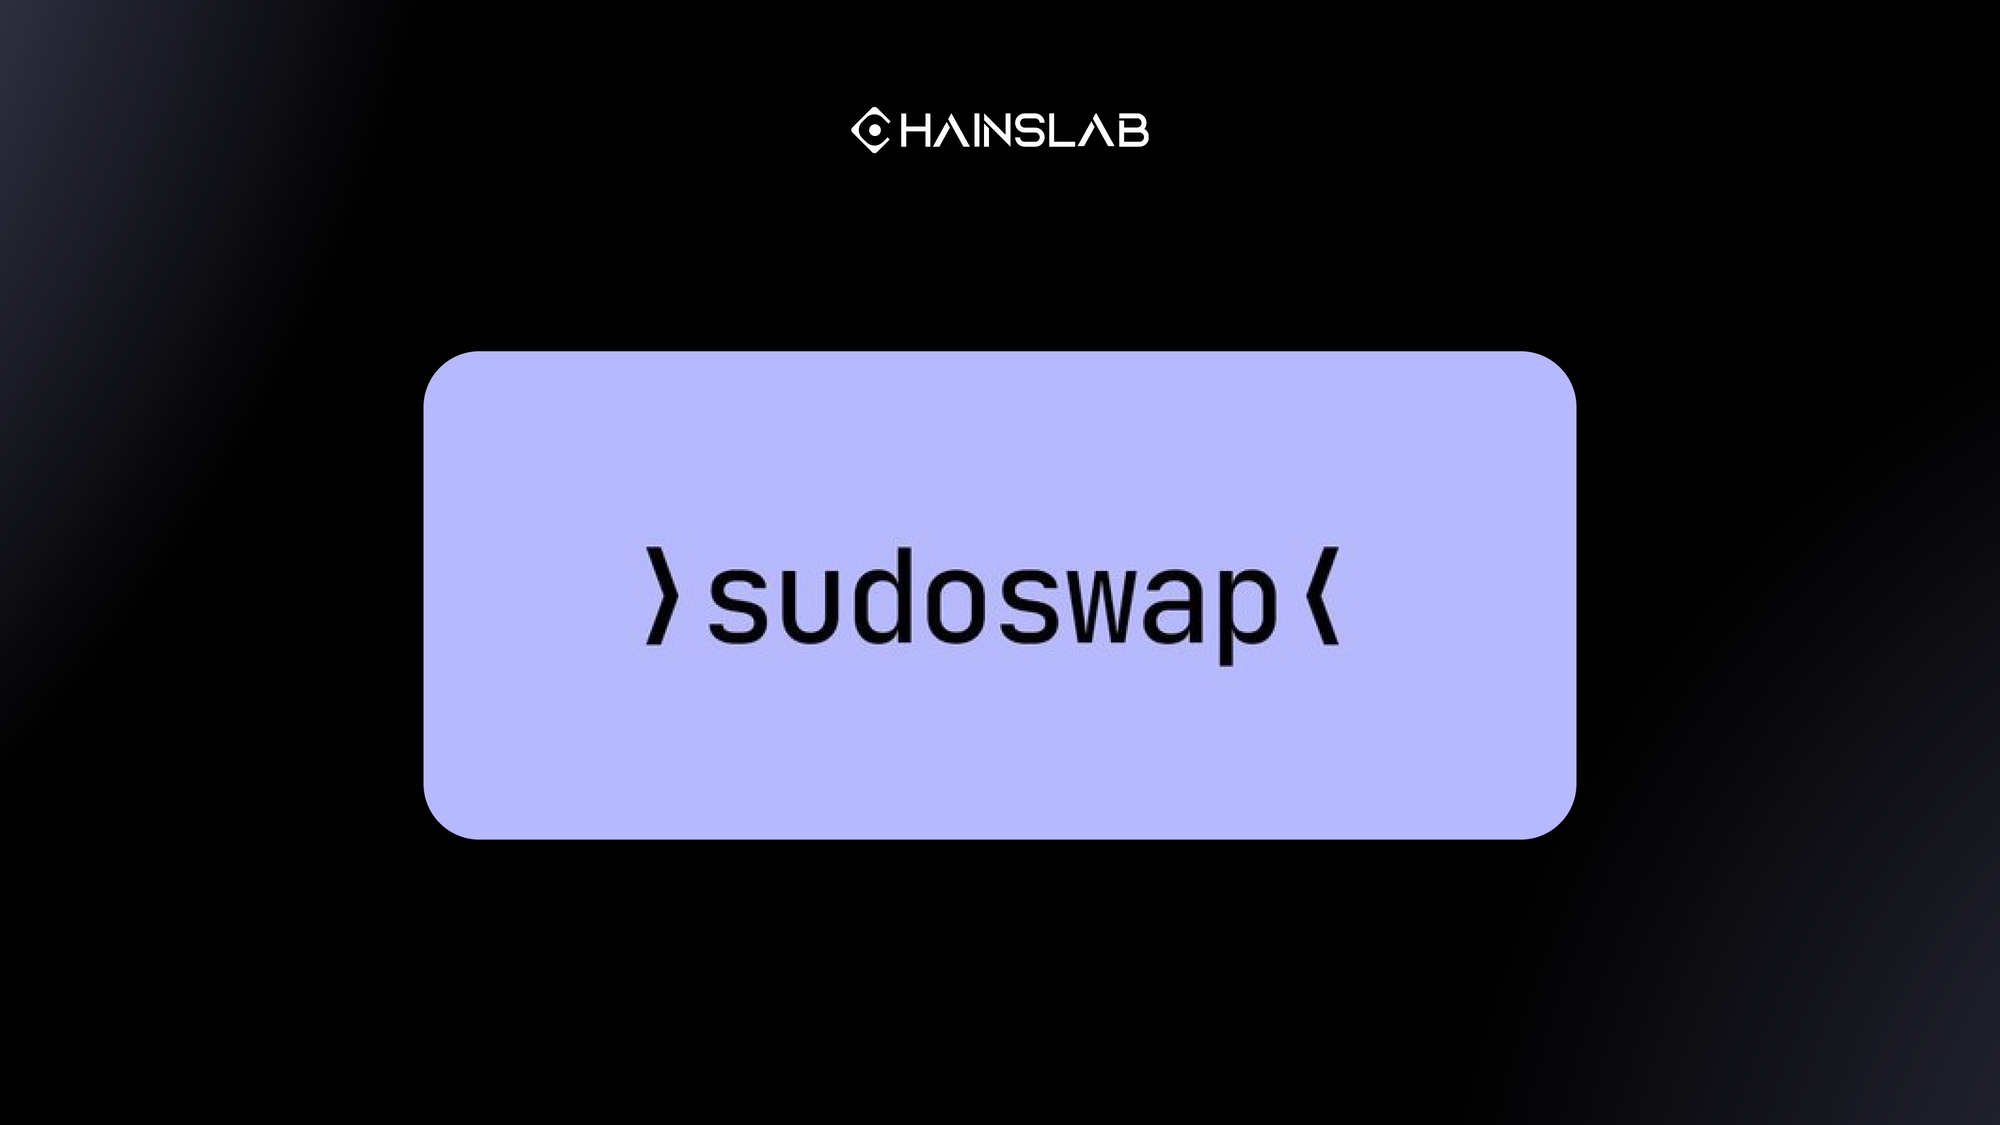 What is so great about sudoswap that everyone is talking about?